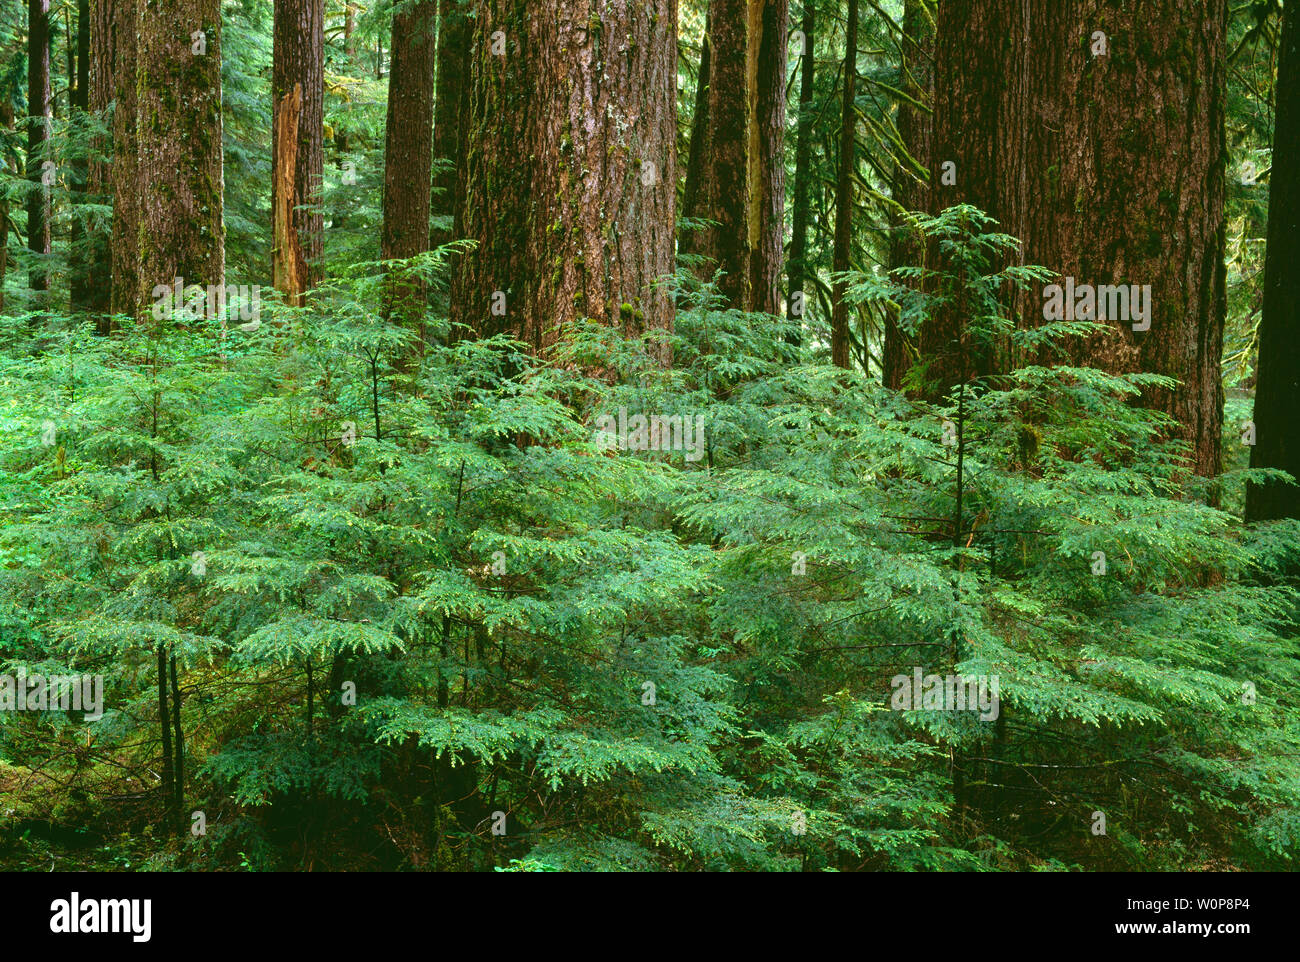 USA, Washington, Olympic National Park, Rain forest with young western hemlock saplings beneath large trunks of mature western hemlock, Sol Duc Valley Stock Photo